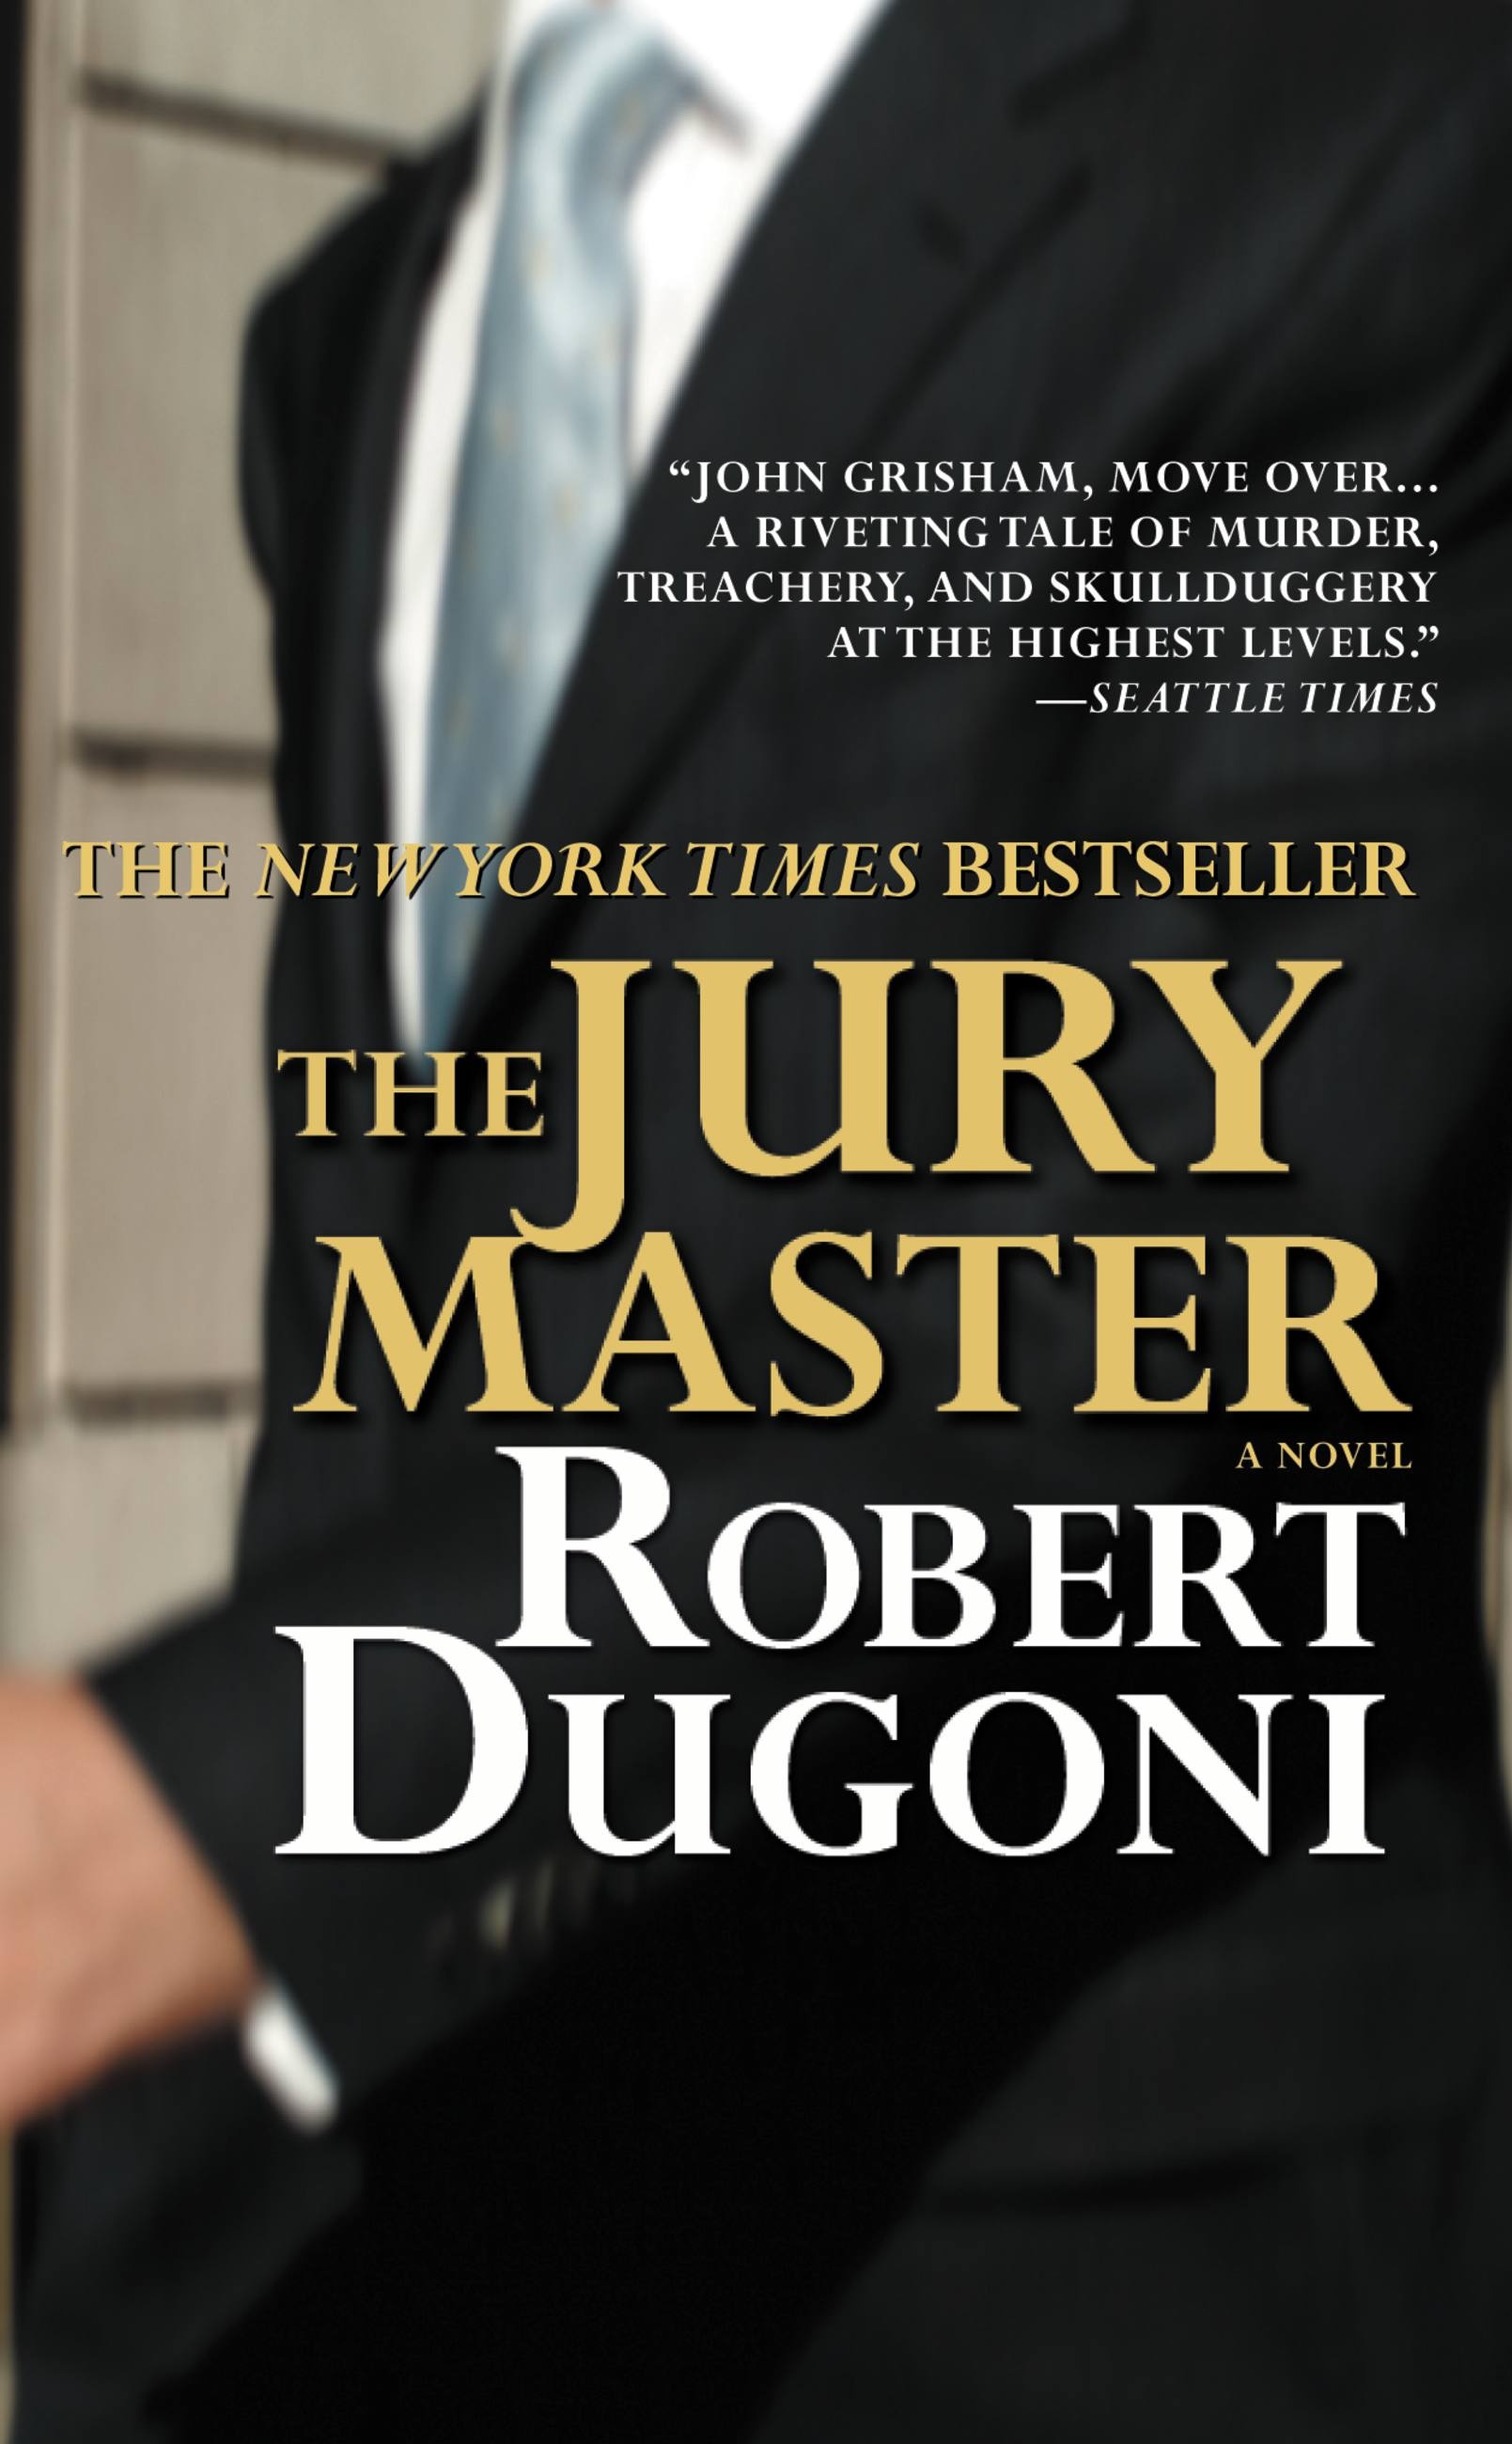 The Jury Master by Robert Dugoni Hachette Book Group